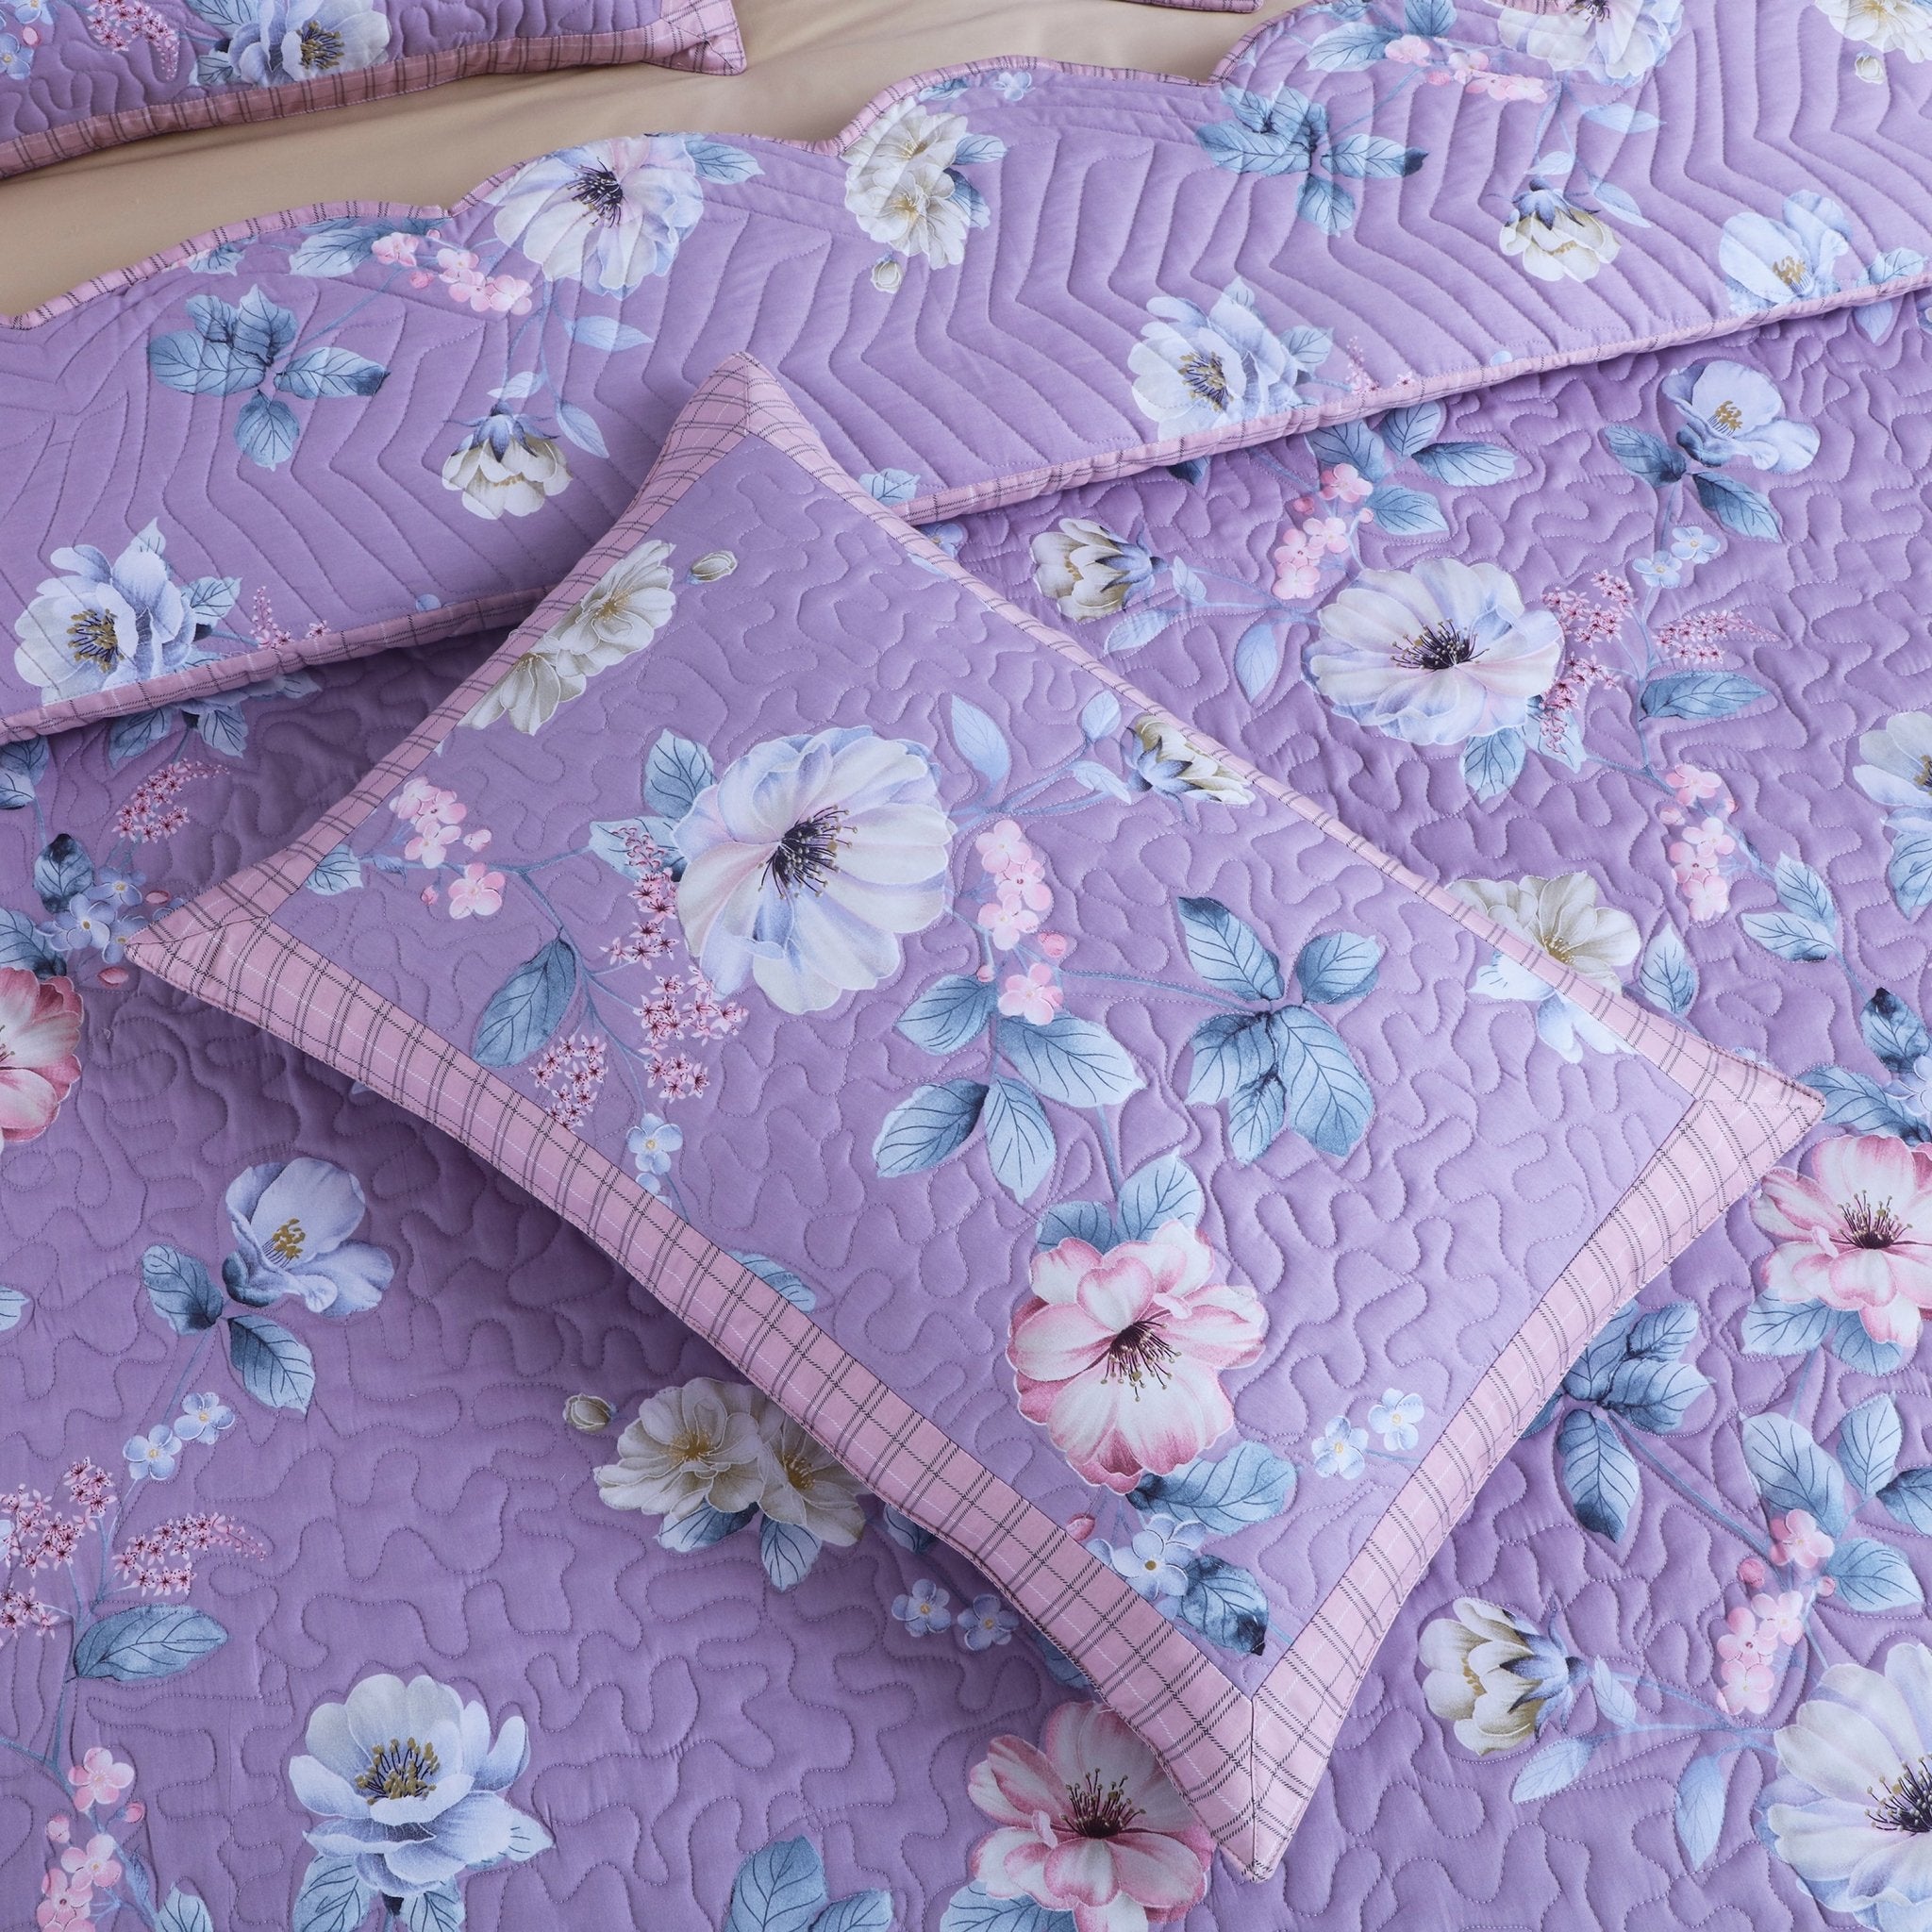 Malako Royale 100% Cotton Lilac Floral King Size 5 Piece Quilted Bedspread Set - MALAKO